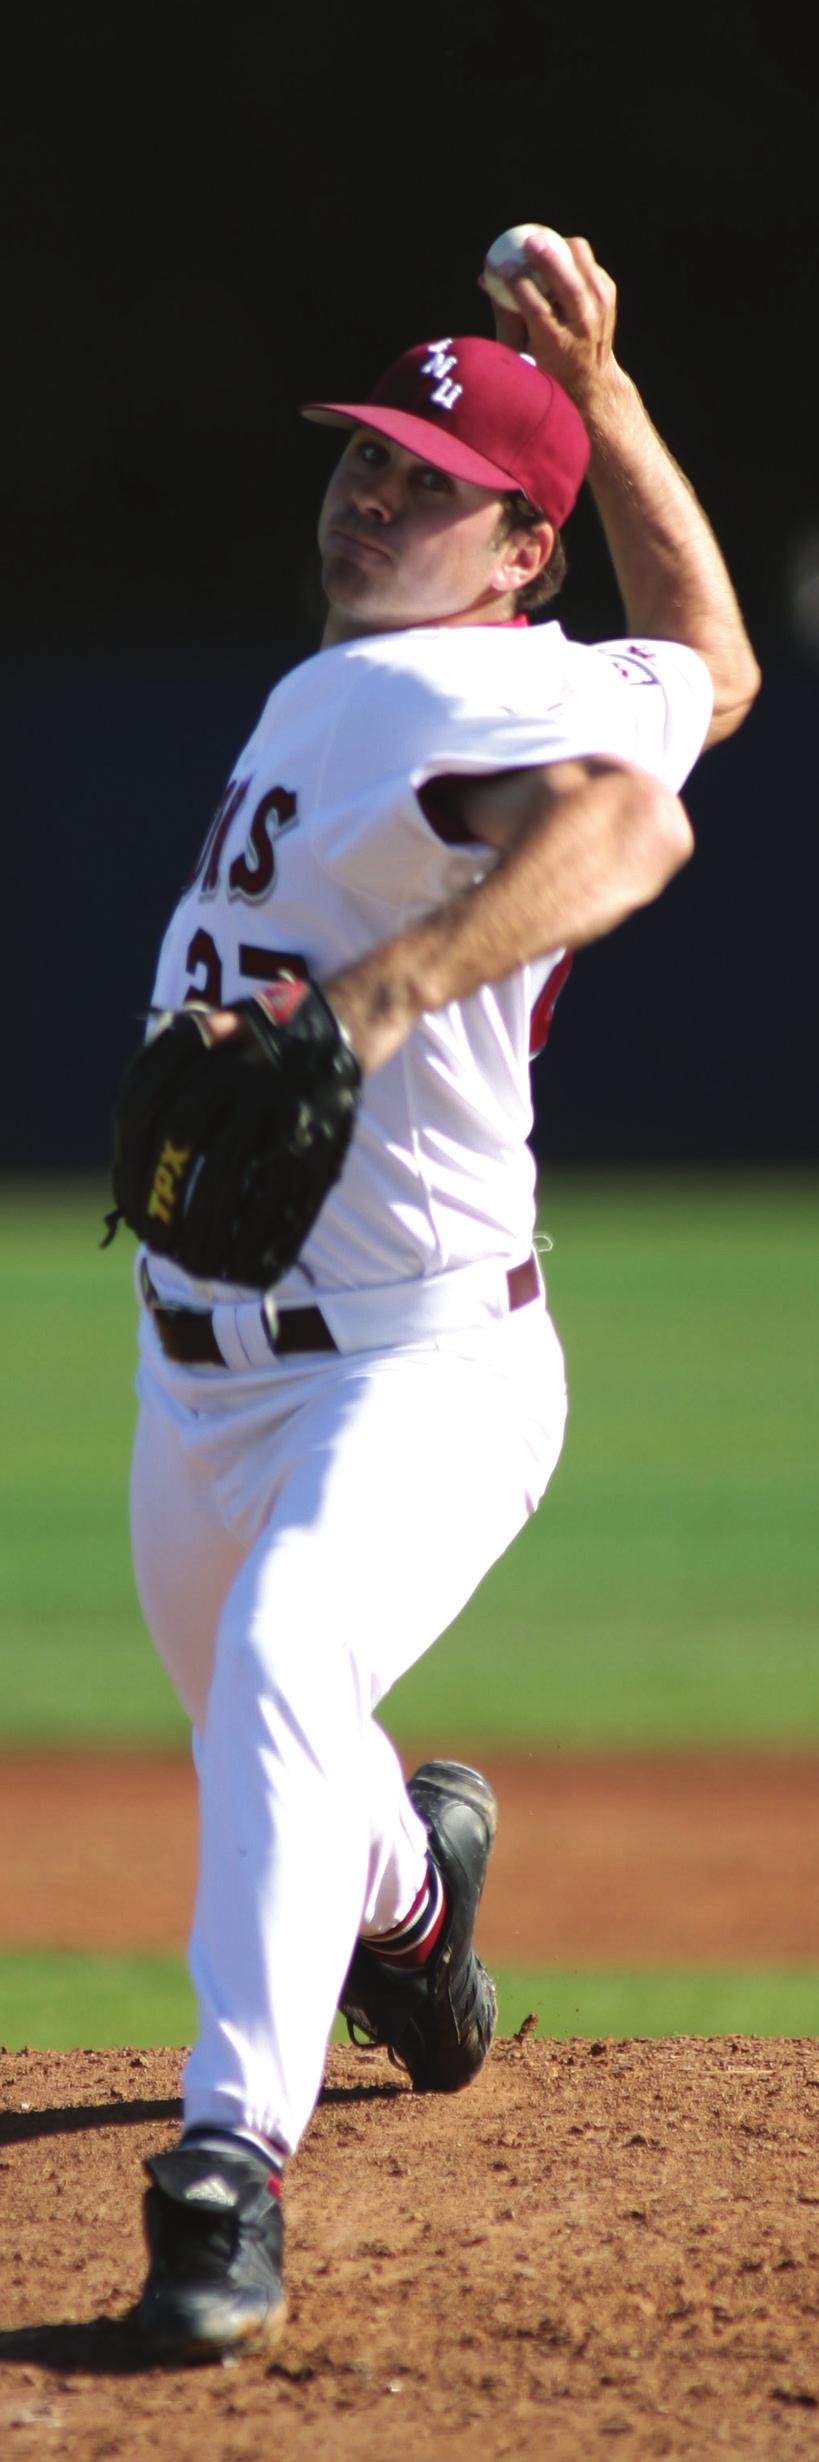 2008 With an experienced and deep infield, the reigning WCC Freshman of the Year roaming the outfield, a strong pitching staff that includes seven upper-classmen arms and key new additions, look for